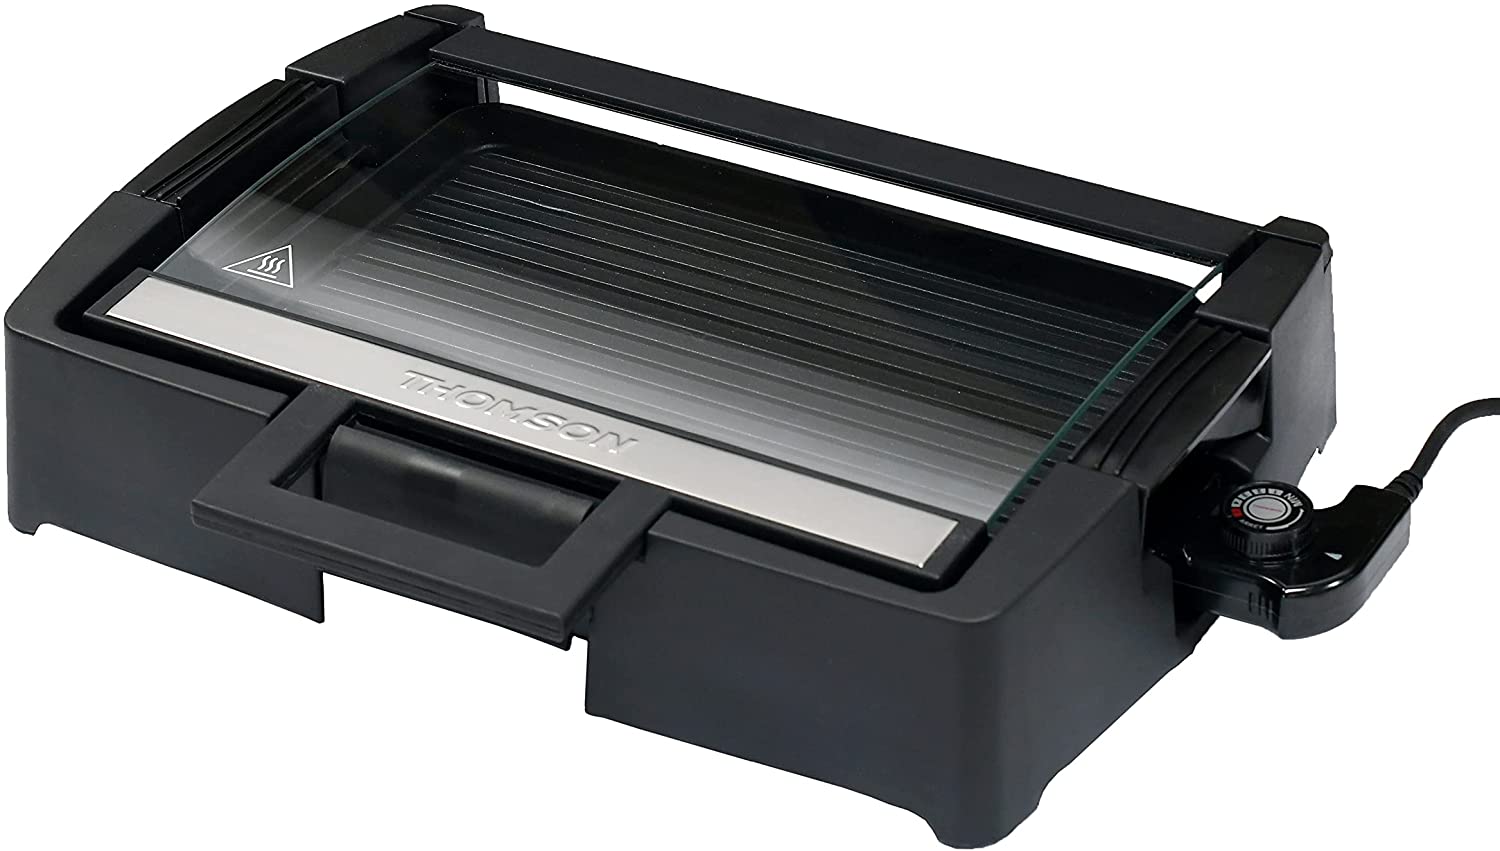 THOMSON Electric BBQ Table Grill with Glass Lid, Electric Grill with Teflon Coating, Grill Plate 1500 Watt, Adjustable Thermostat, Black/Grey